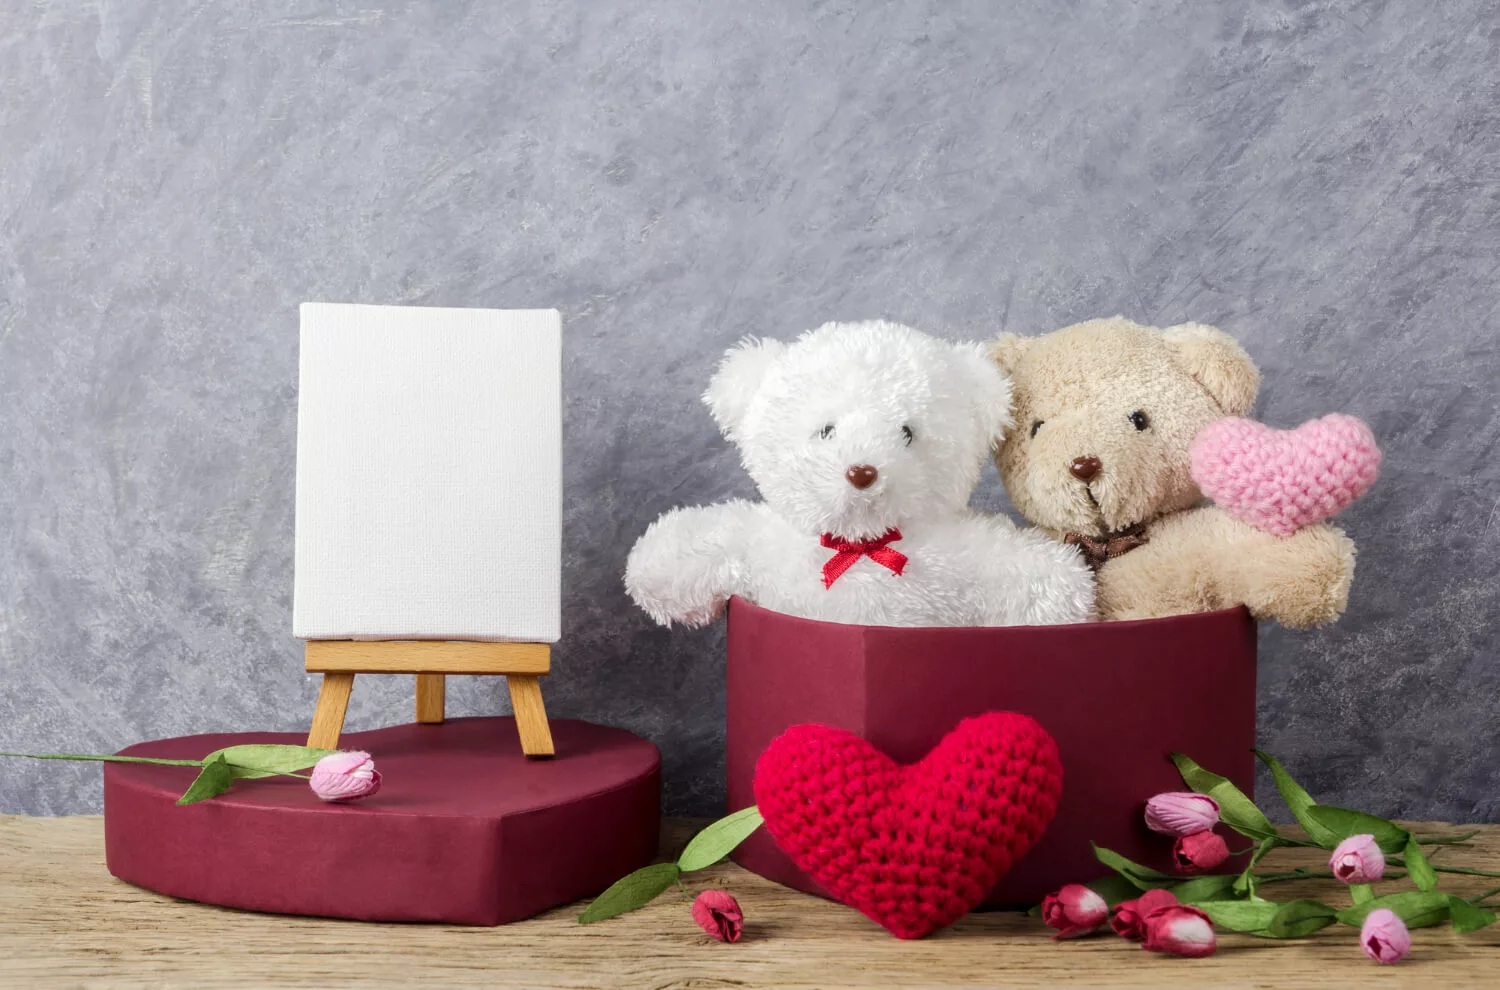 teddy-bear-red-heart-gift-box-wood-table-blank-canvas-frame-easel-painting